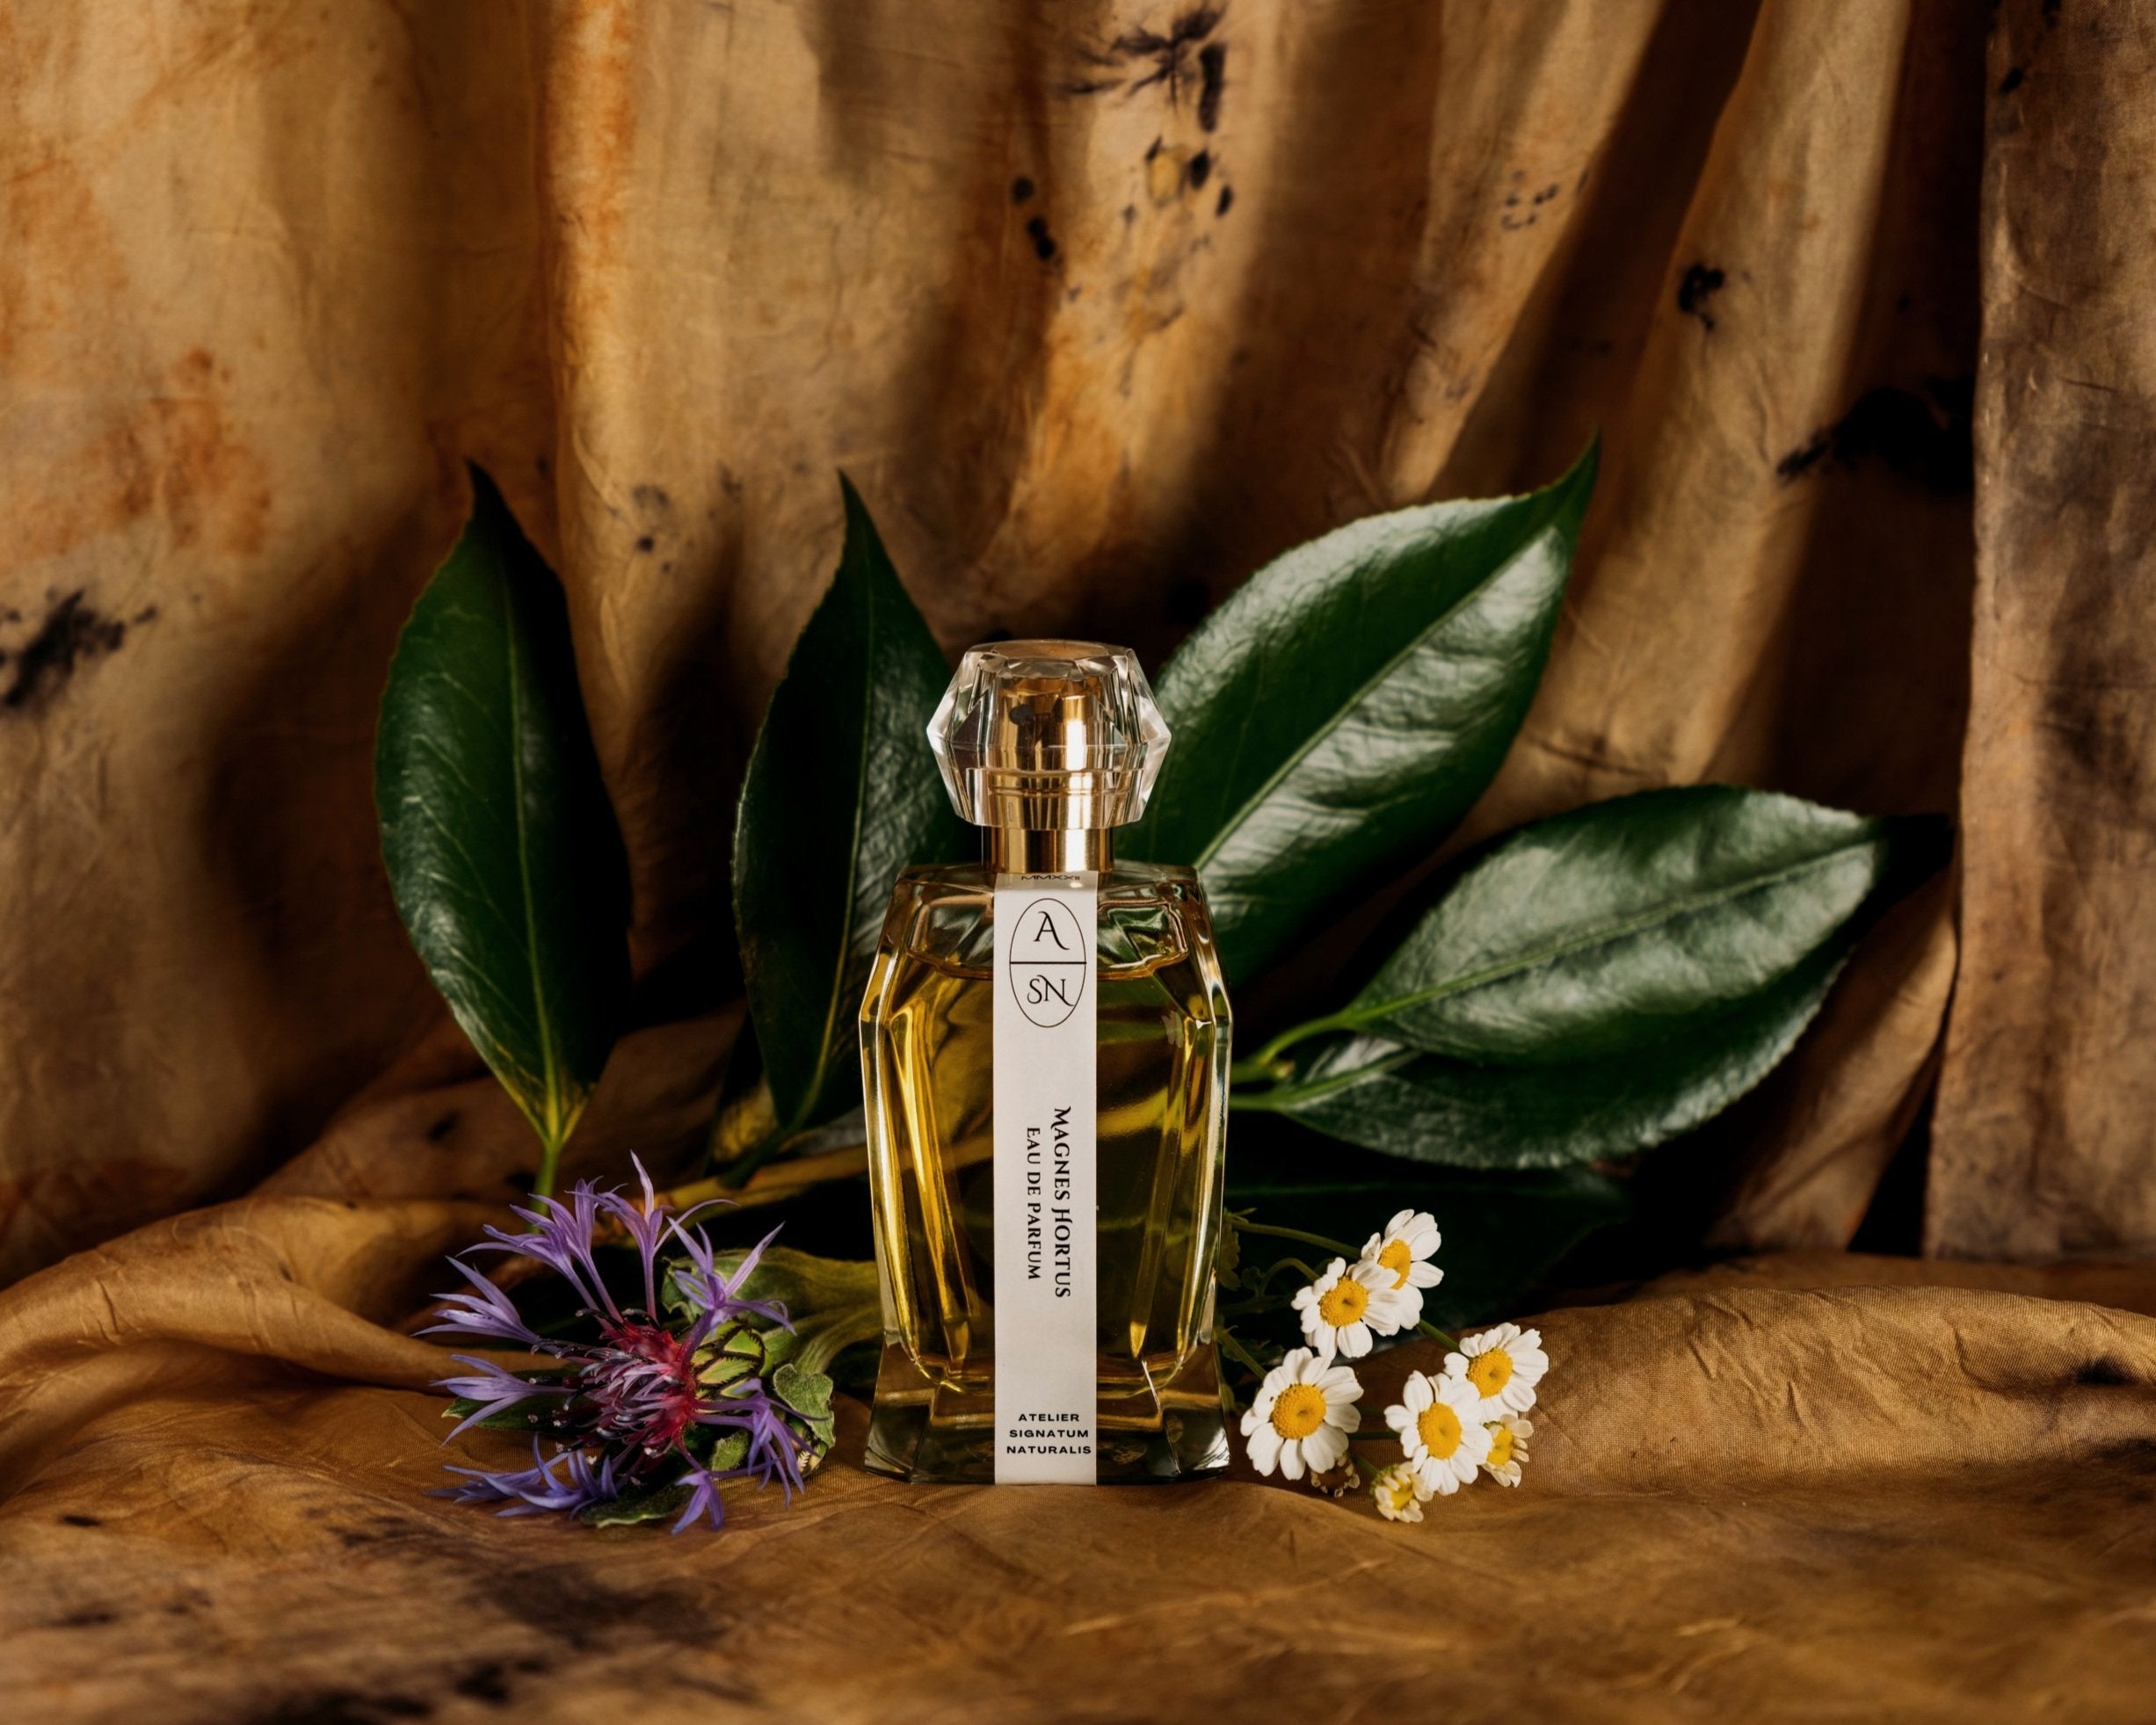 Handcrafted limited edition natural perfume